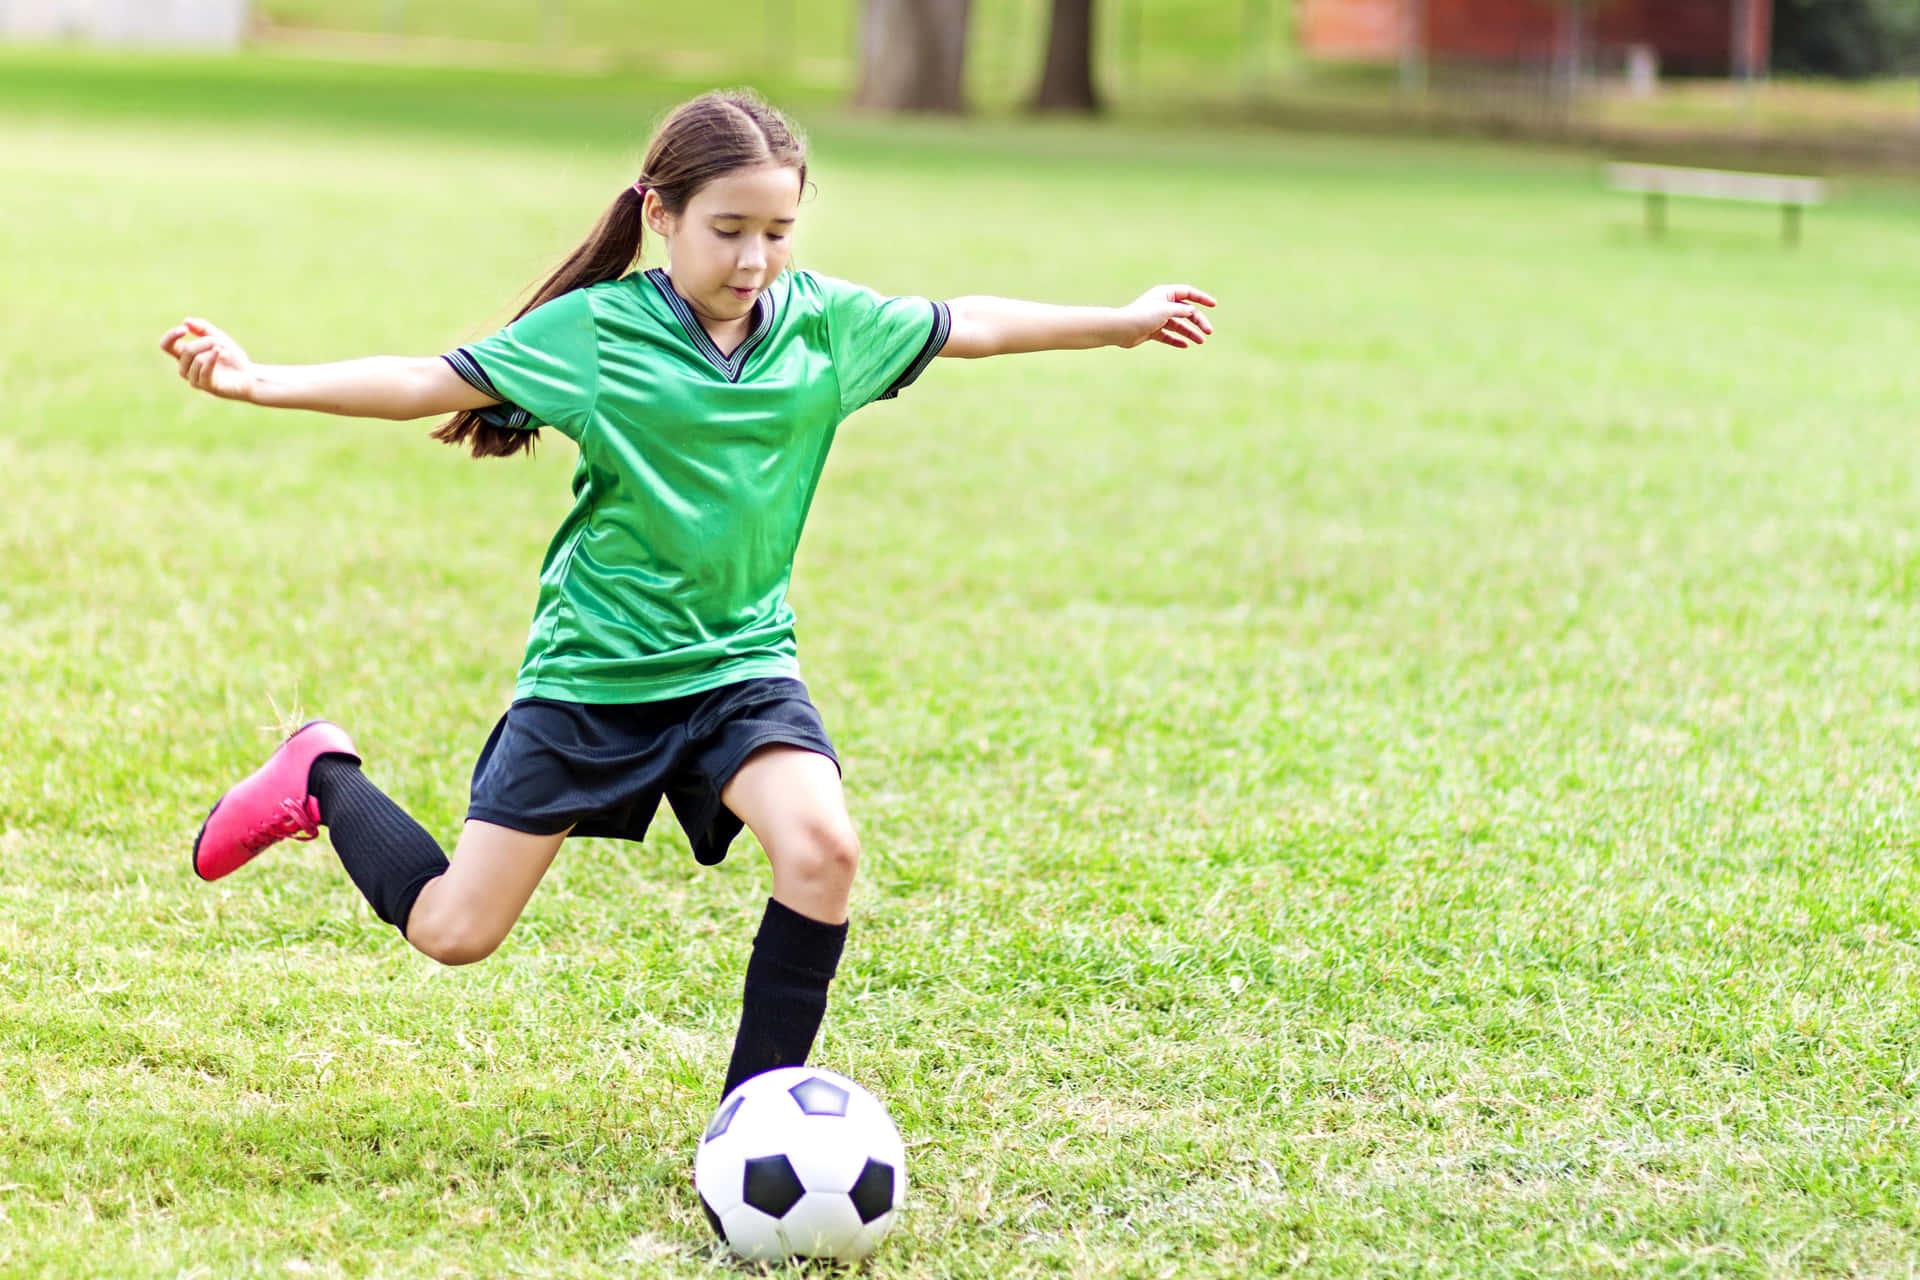 Young Girl Playing Soccer Outdoors.jpg Wallpaper